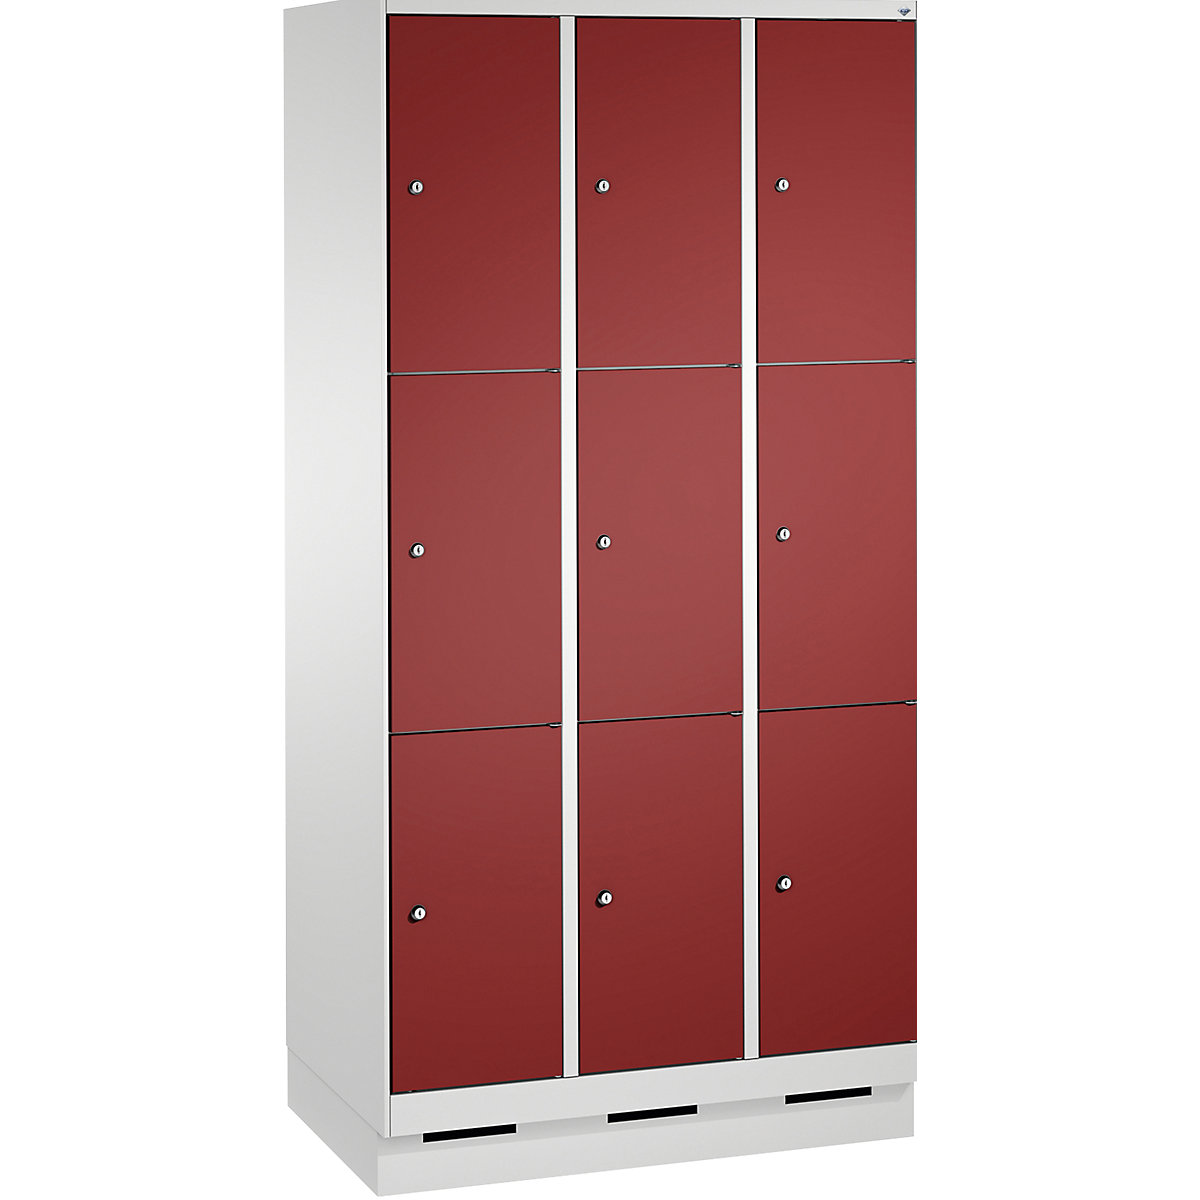 EVOLO locker unit, with plinth – C+P, 3 compartments, 3 shelf compartments each, compartment width 300 mm, light grey / ruby red-3